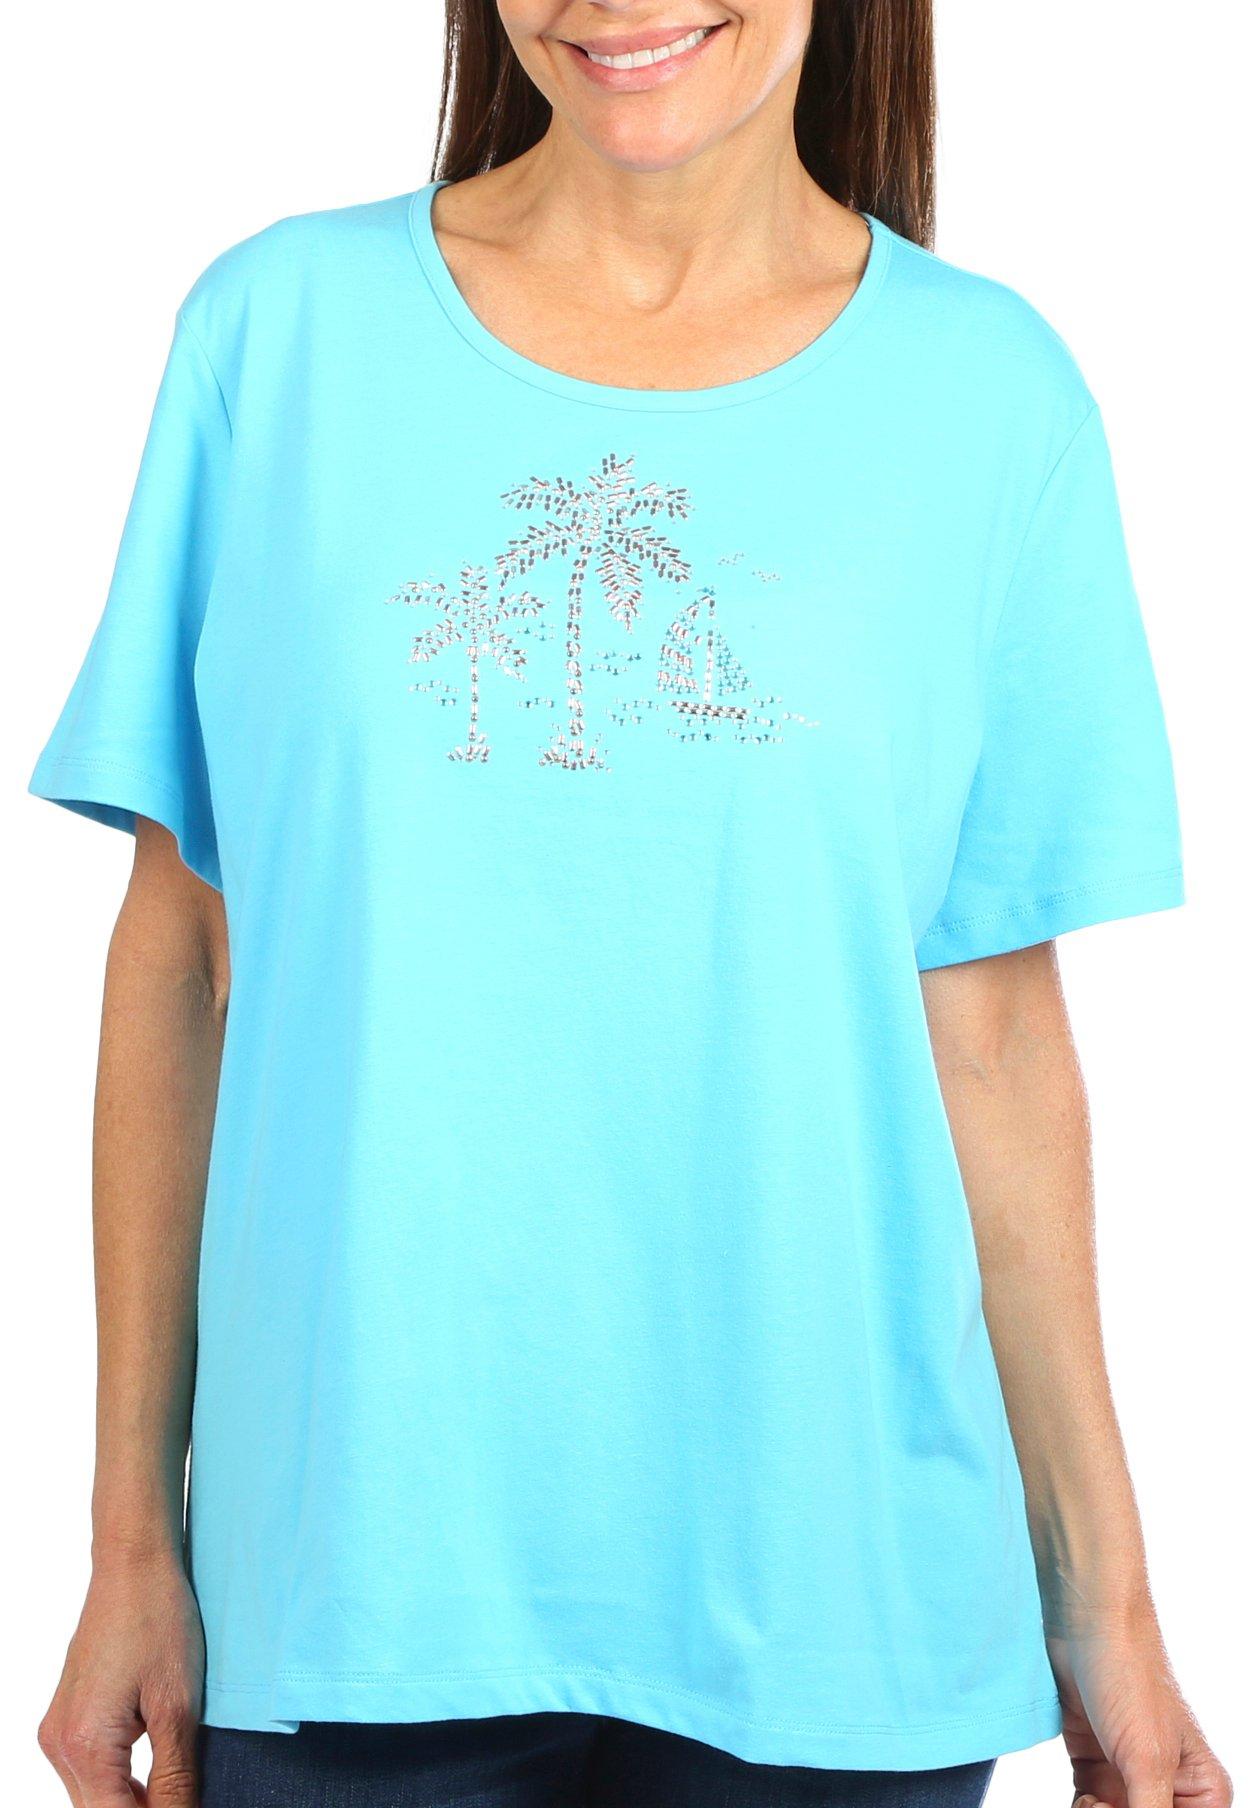 Coral Bay Womens Jeweled Palm Trees Short Sleeve Top